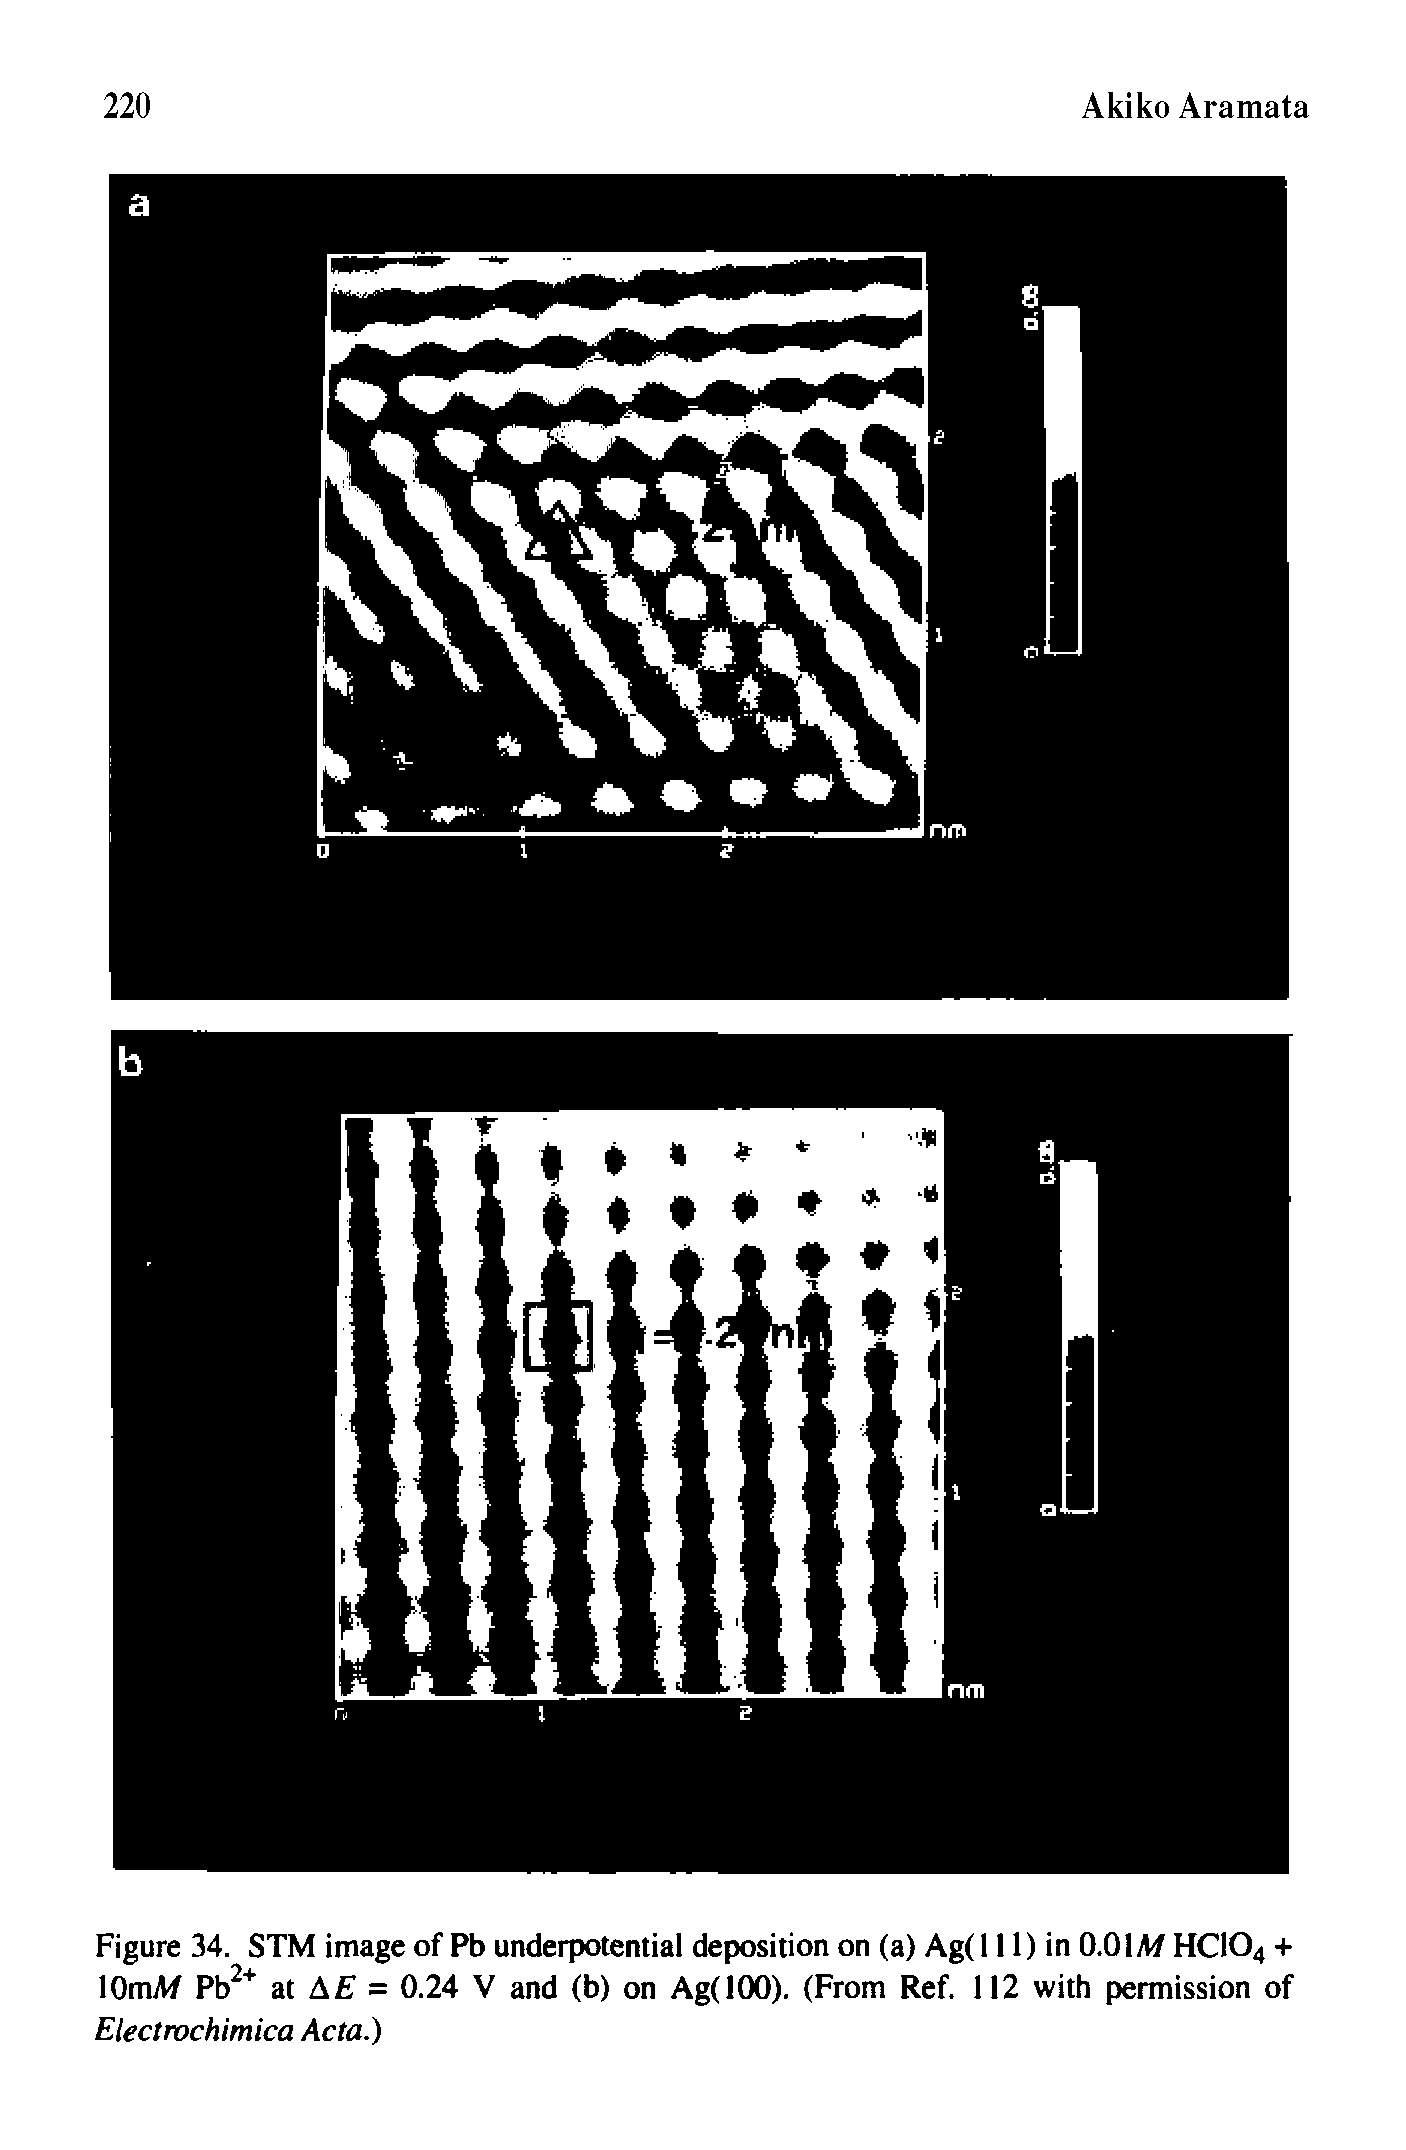 Figure 34. STM image of Pb underpotential deposition on (a) Ag(l II) in 0.0IAfHCIO4 + lOmAf at A = 0.24 V and (b) on Ag(JOO), (From Ref, 112 with permission of Electrvchimica Acta.)...